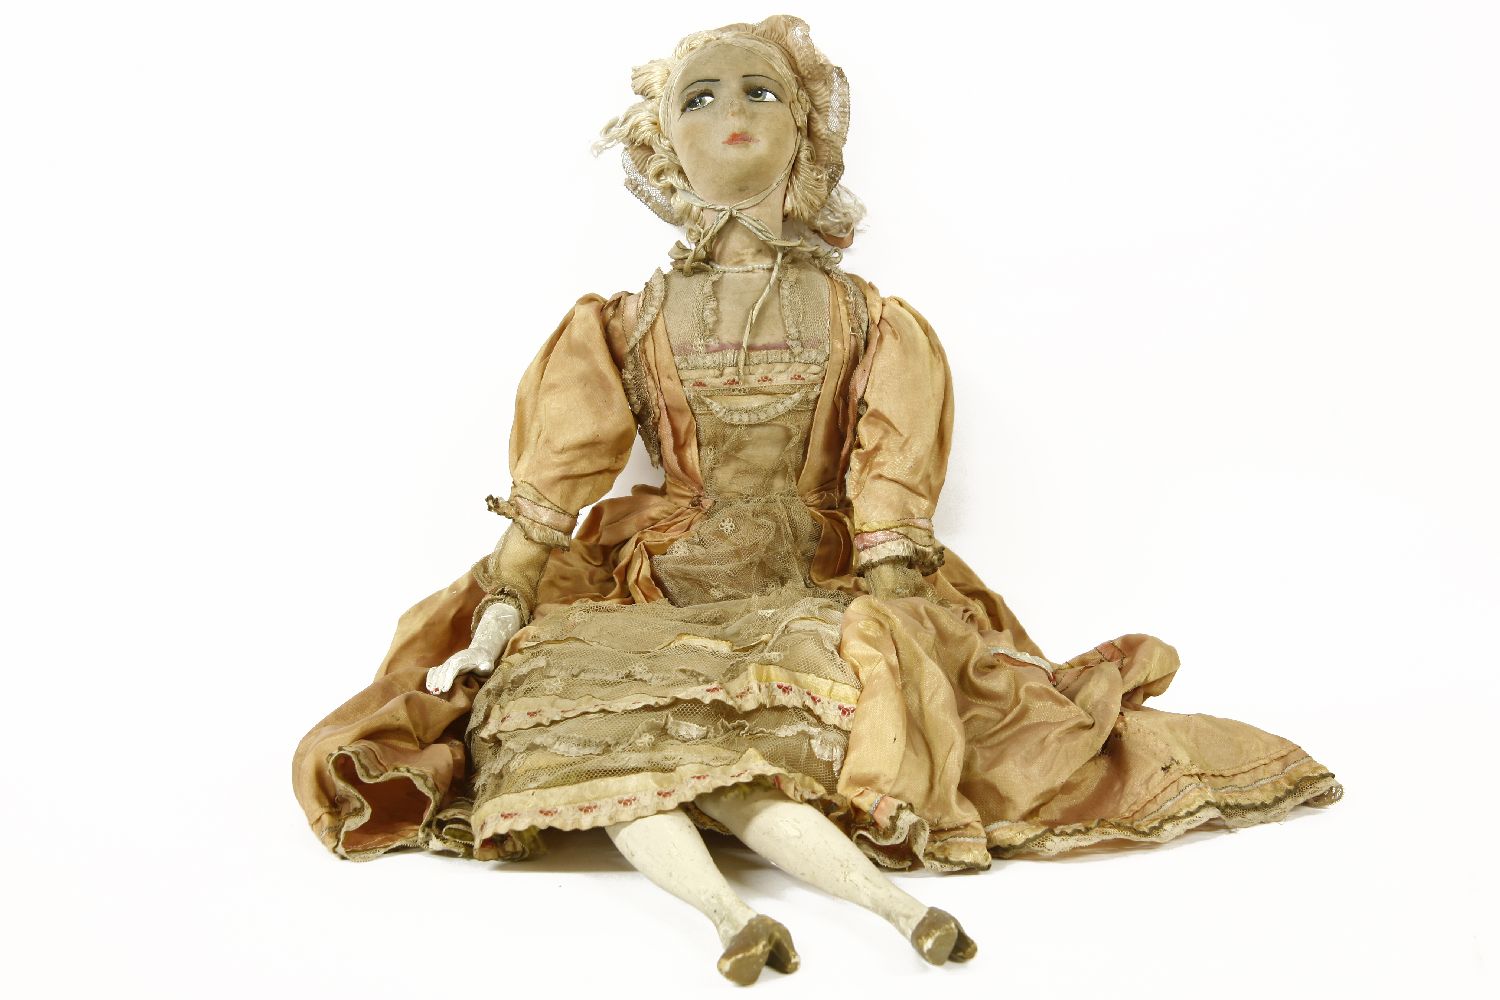 A large jointed fabric and plaster doll, 84cm long